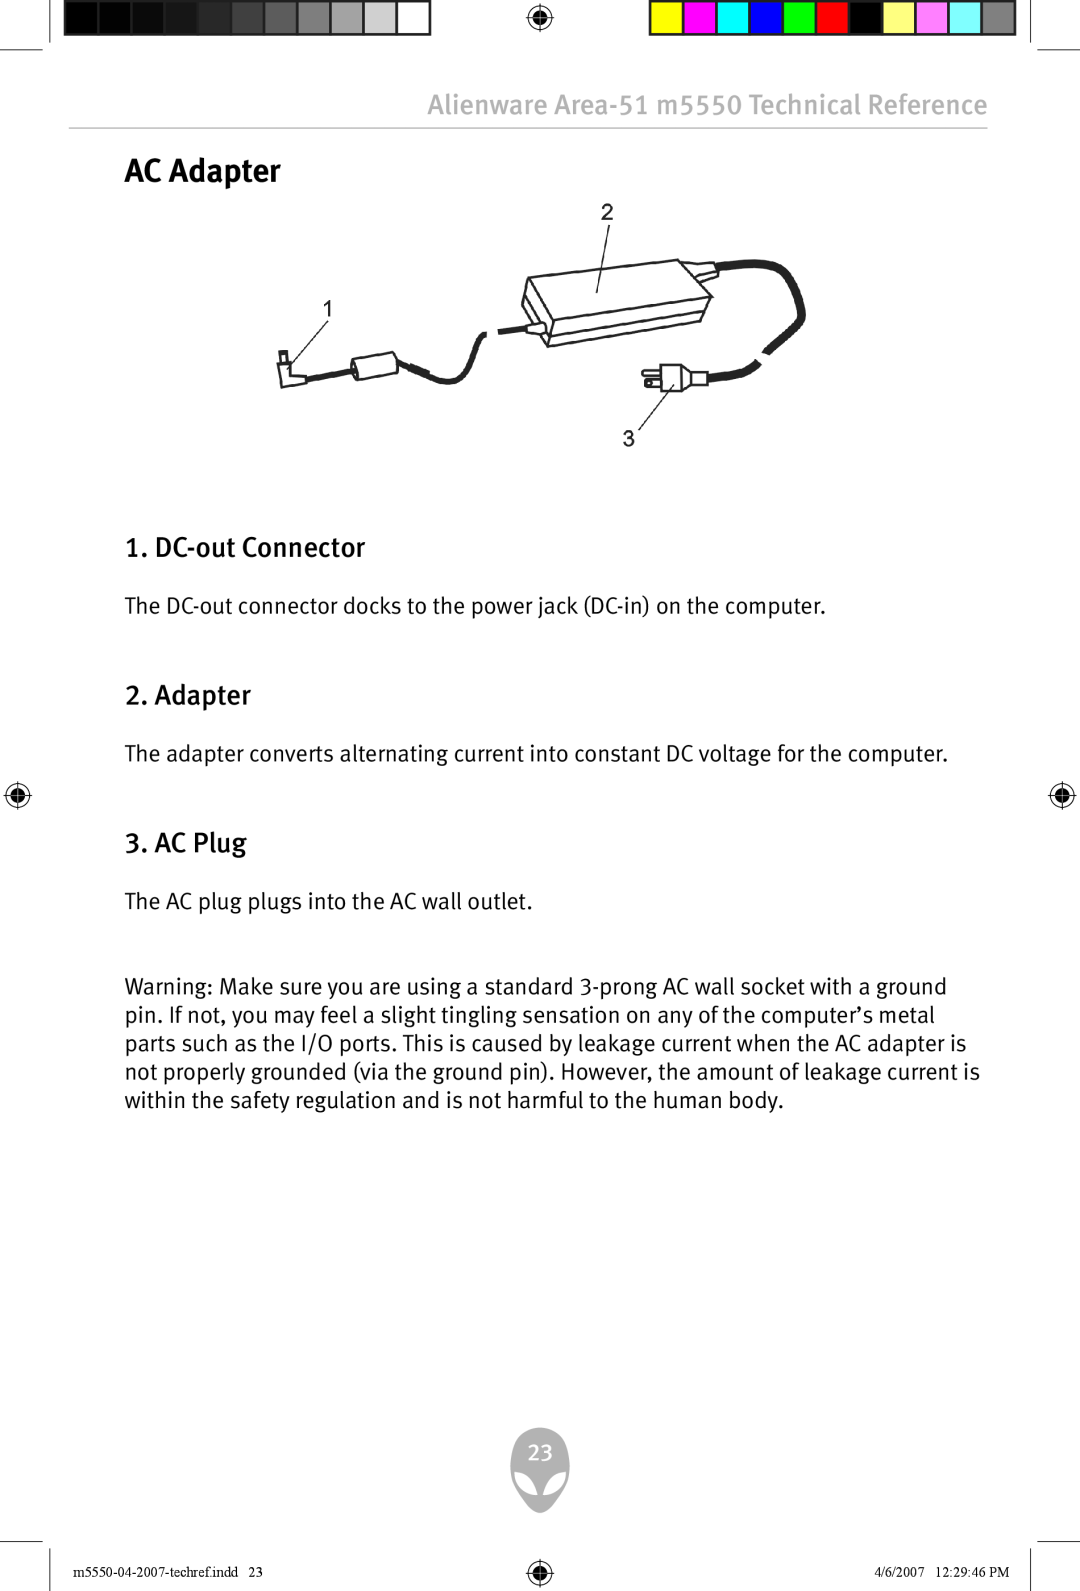 Alienware user manual AC Adapter, DC-out Connector, AC Plug, Alienware Area-51 m5550 Technical Reference 